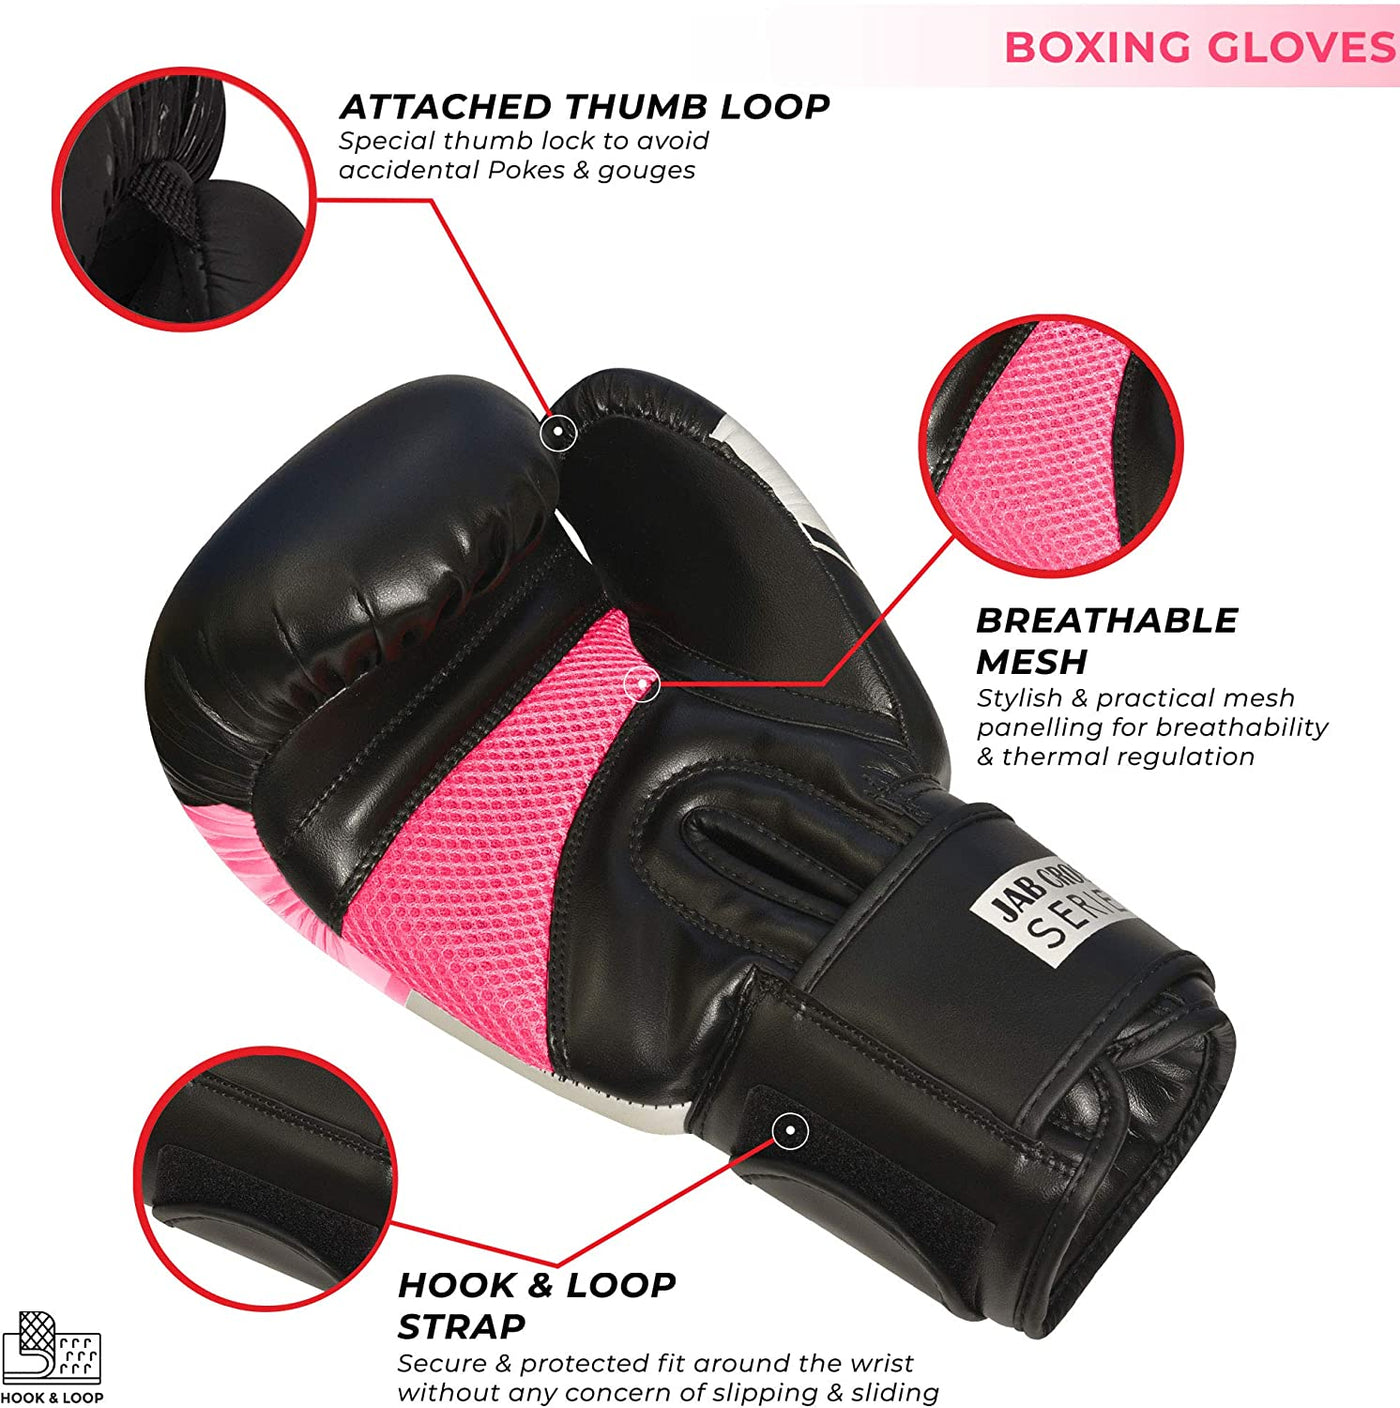 Xn8 Boxing Gloves Jab Cross Series - Focus Pads Punching - Lamina Hide Leather Mitts For Fighting, Kickboxing, Sparring, Muay Thai